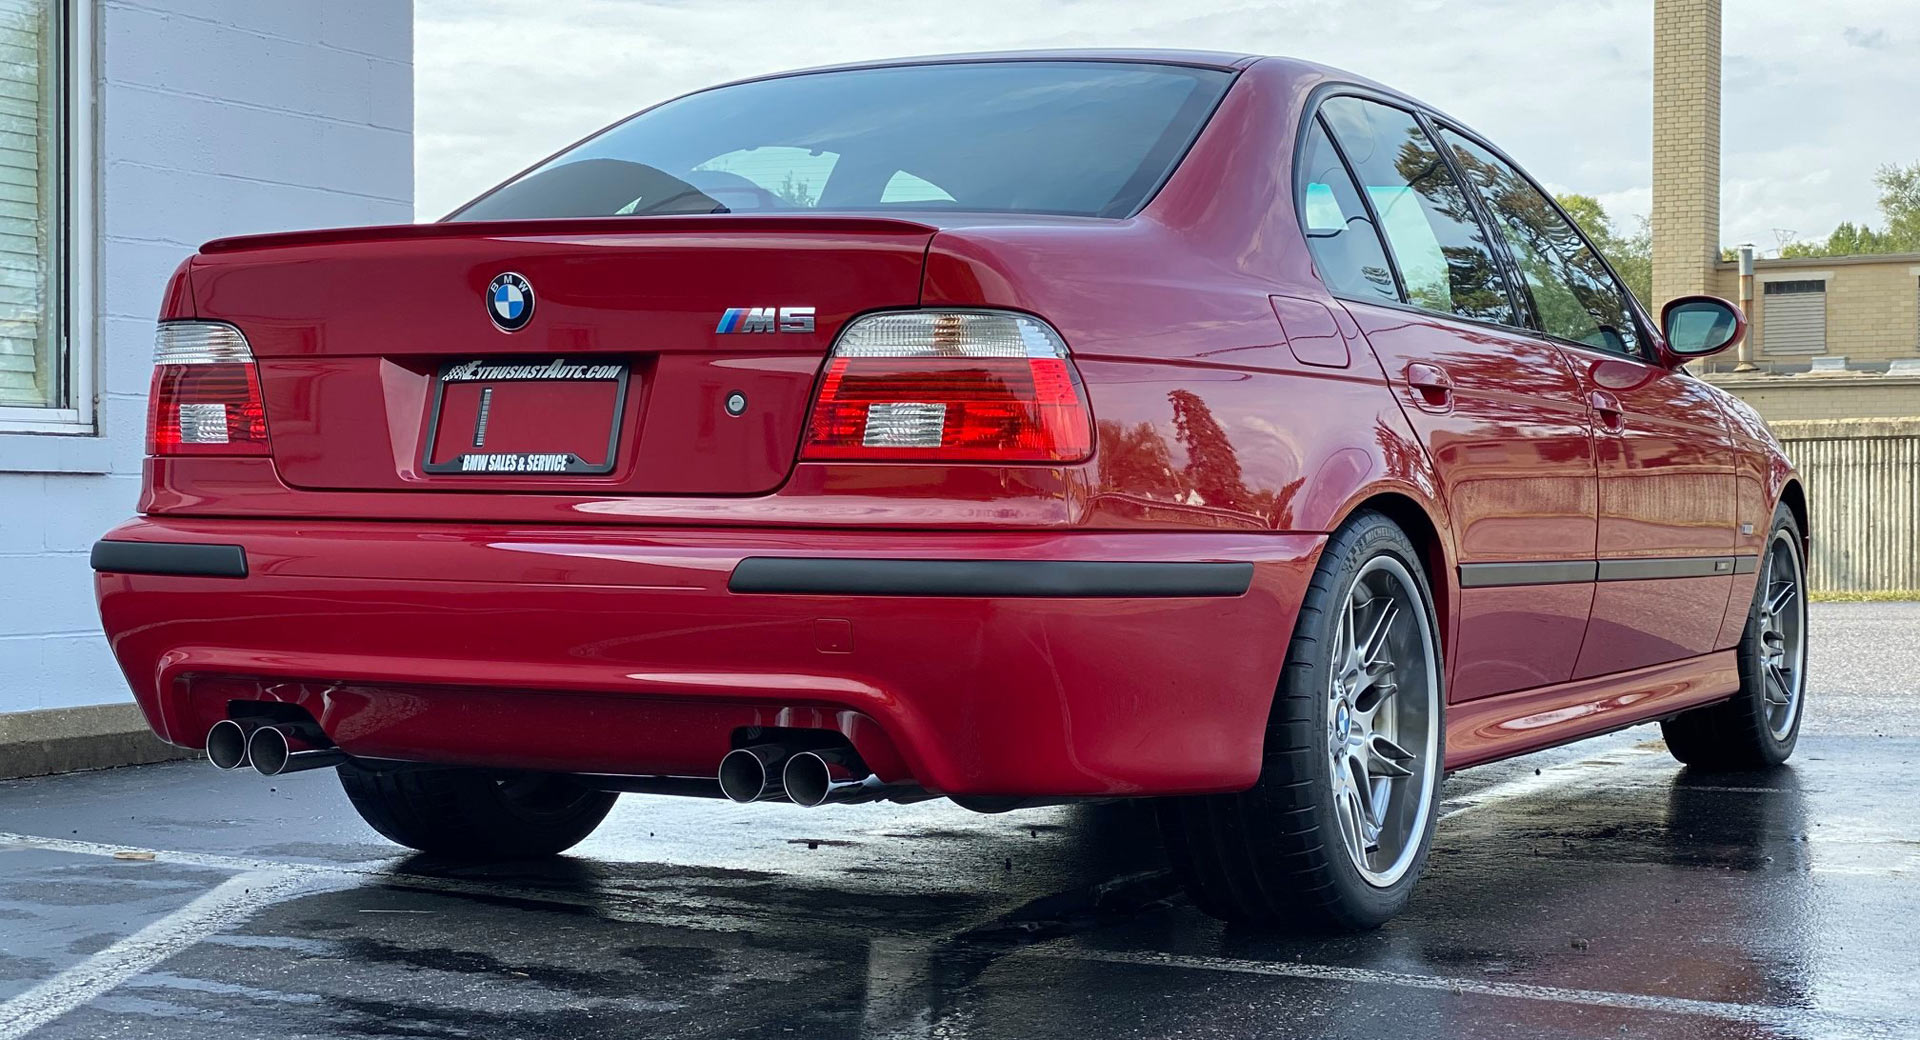 https://www.carscoops.com/wp-content/uploads/2019/10/74aa0a89-imola-red-bmw-e39-m5-177.jpg